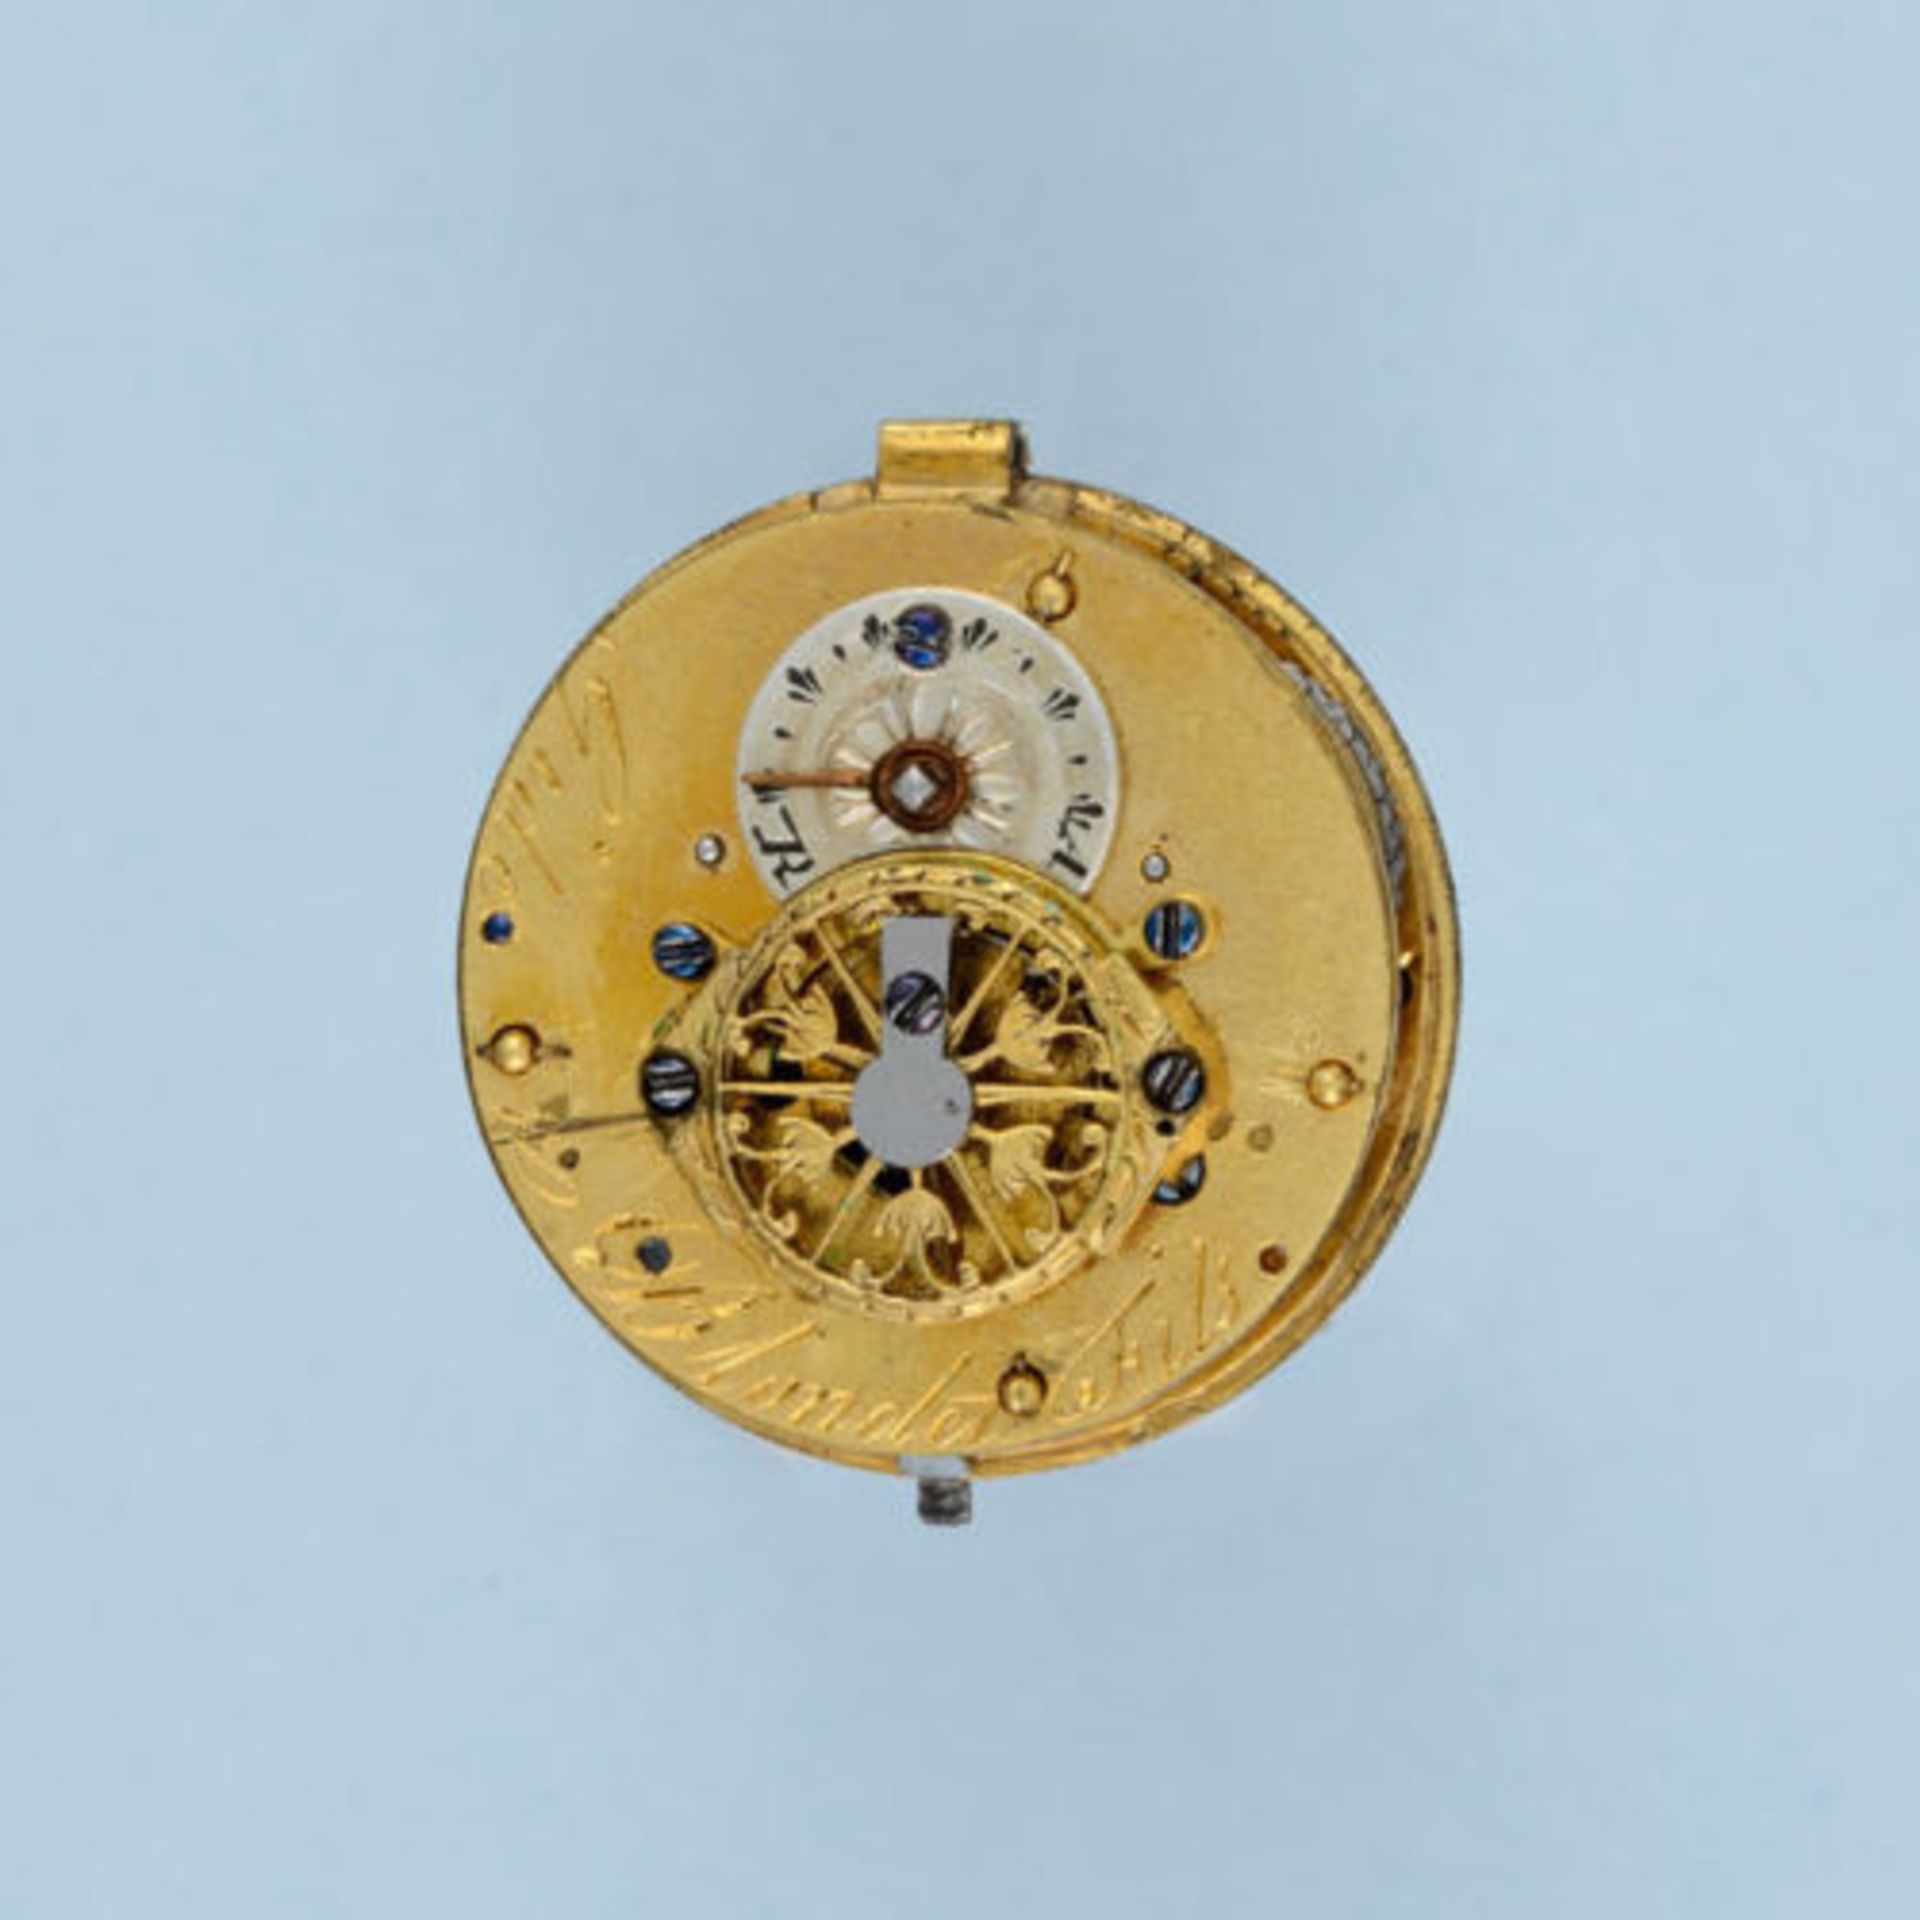 Gold and Enamel Verge Ball Watch and Chain - Image 7 of 7